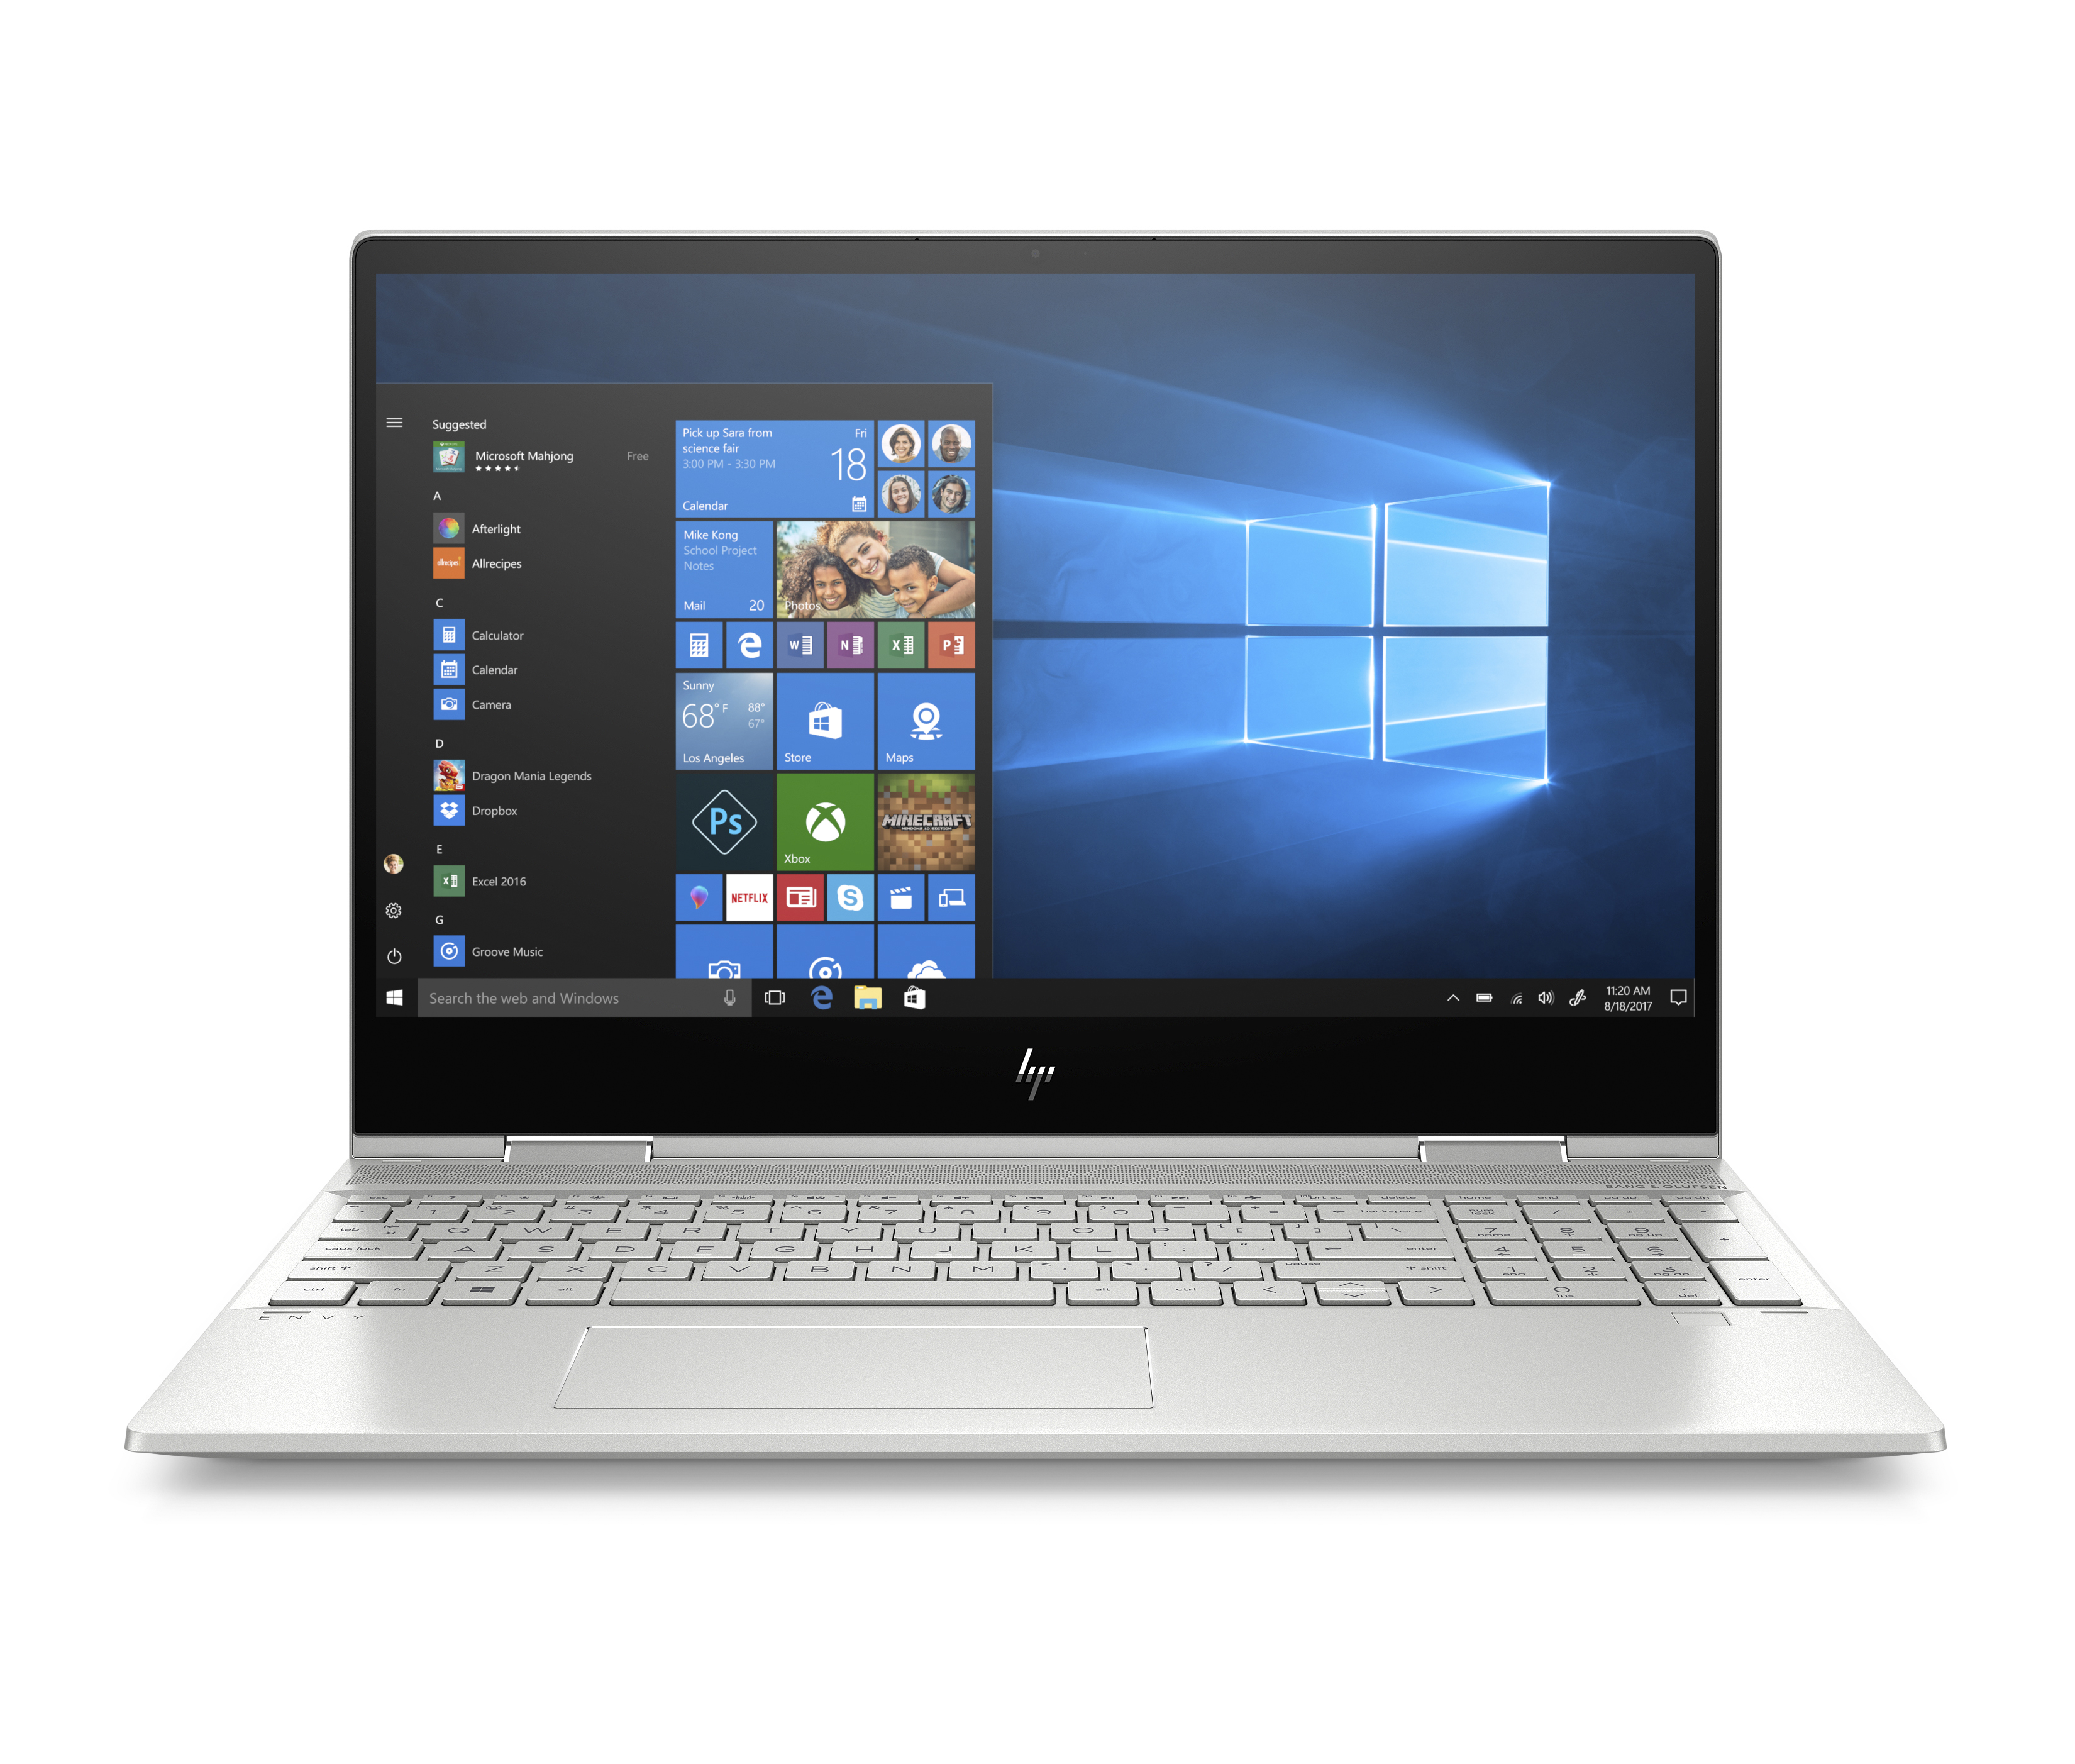 HP ENVY x360 Convertible 15-dr1010nr 15.6" With Intel Core i7-10510U 8GB DDR4 512GB SSD Windows 10 Home Laptop - image 1 of 5